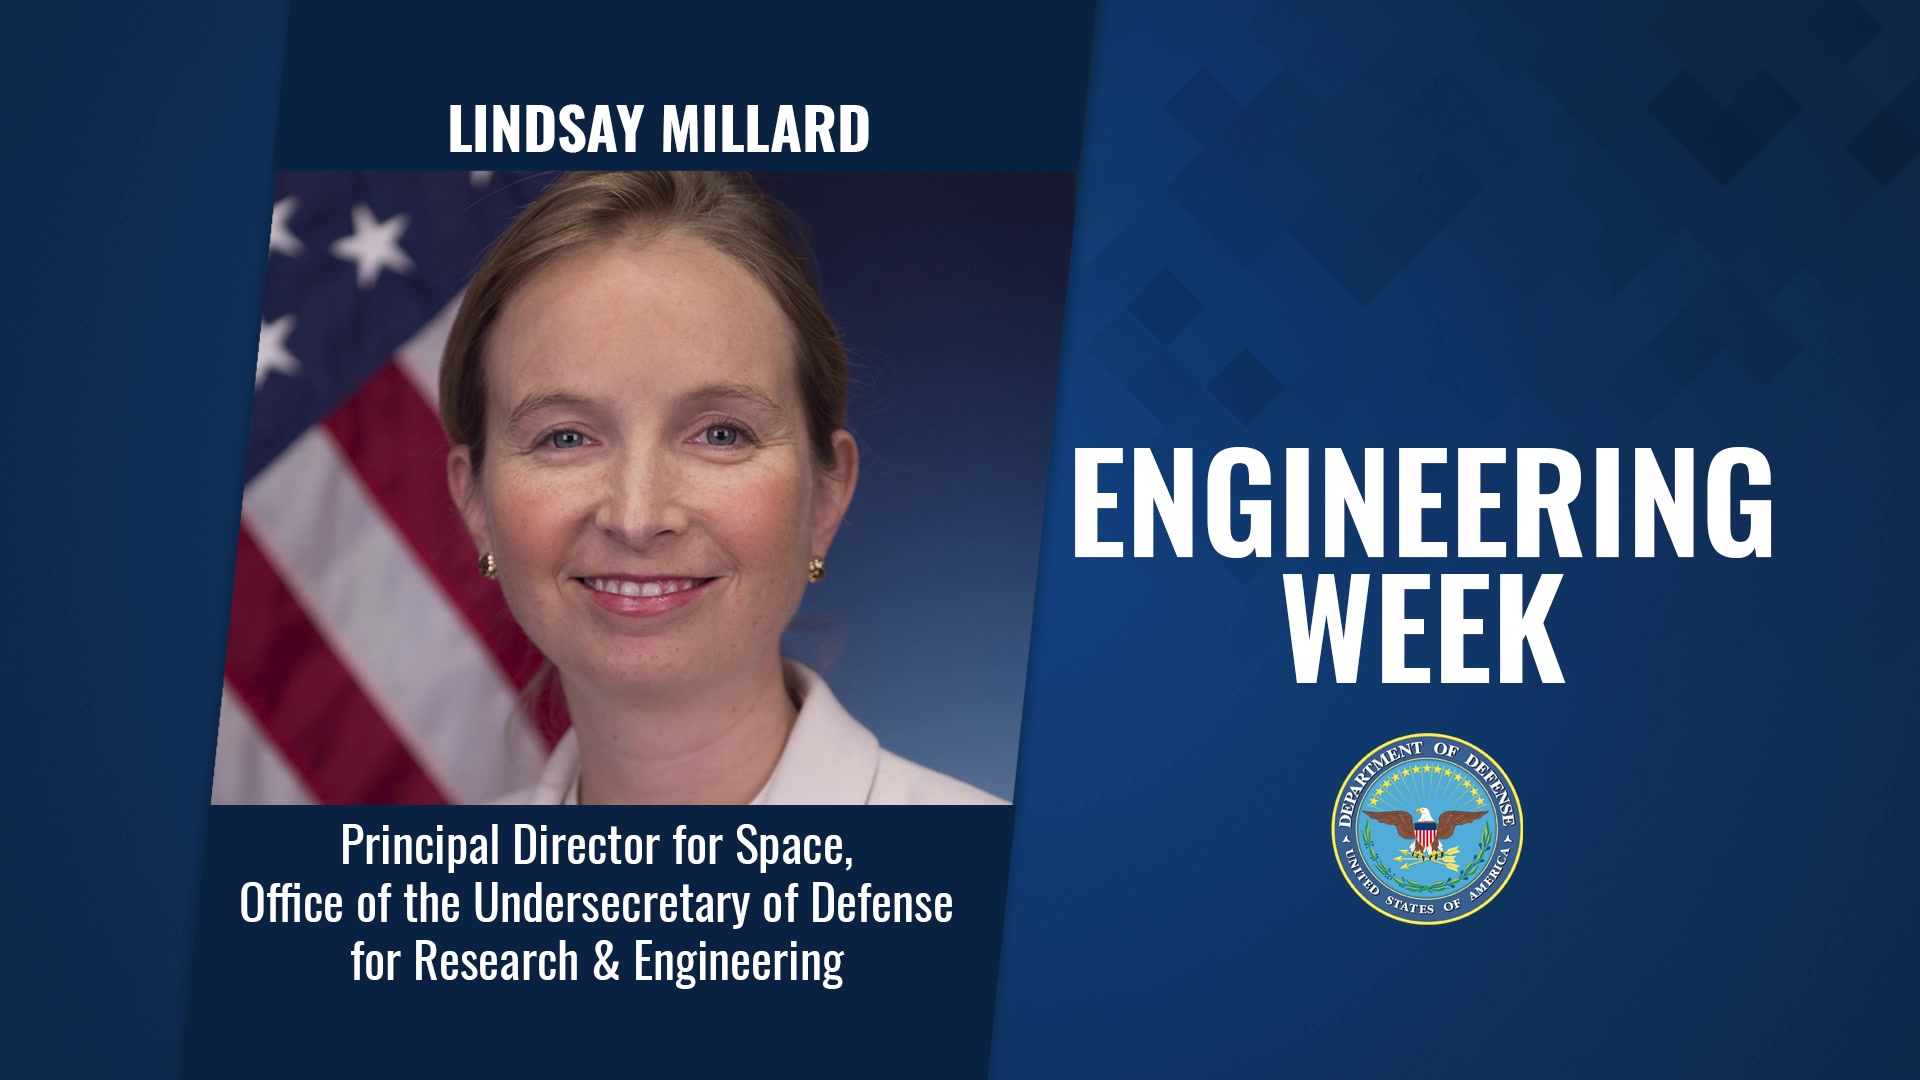 During Engineers Week, Lindsay Millard, the Defense Department's principal director for space, explains why aspiring engineers might pursue a career with the DOD. The event runs Feb. 21-27.